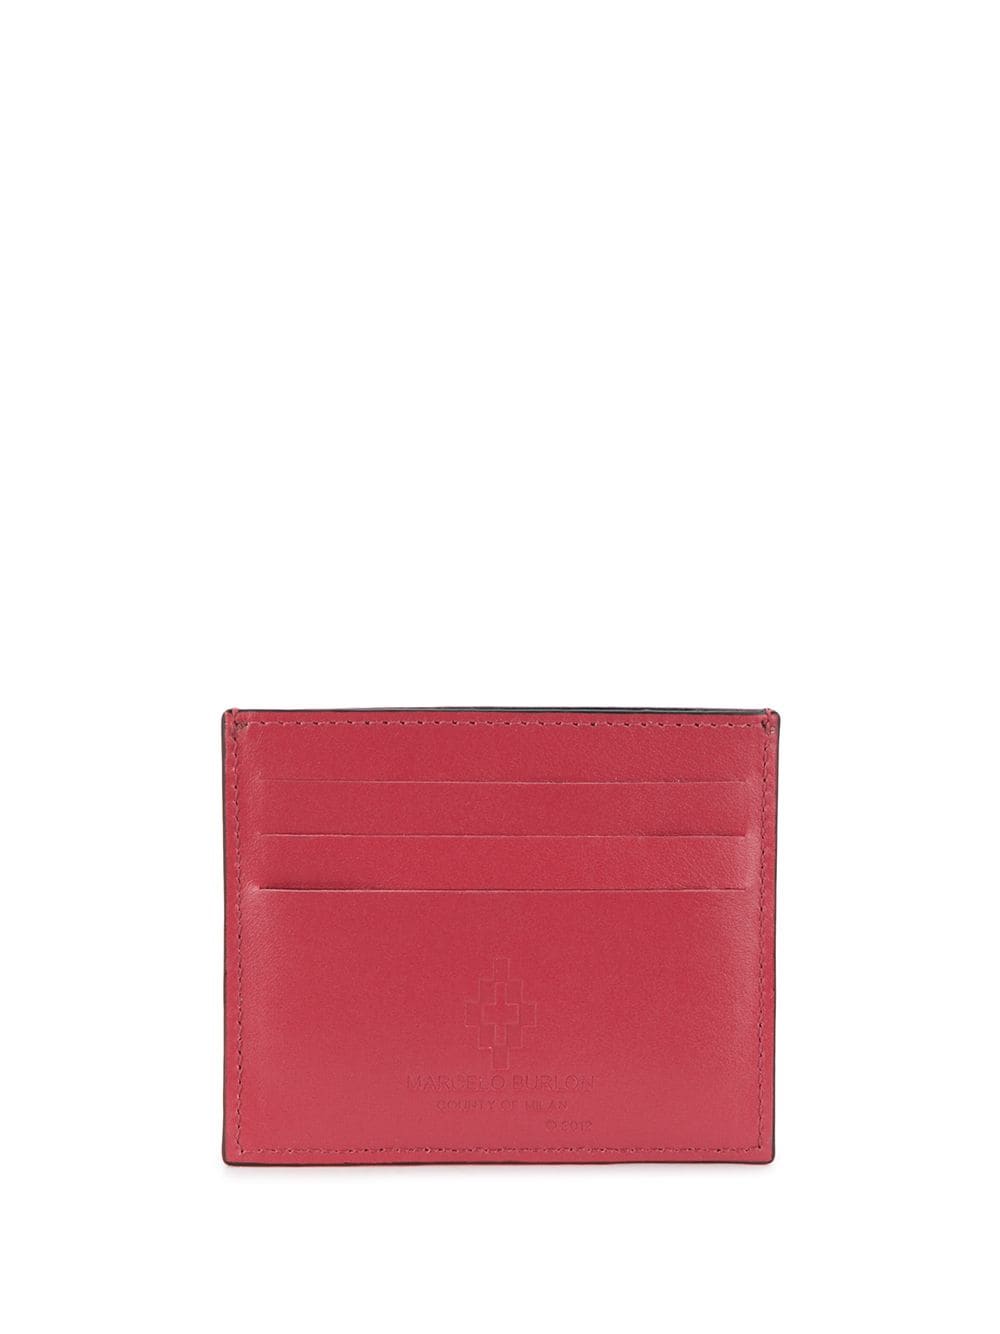 MARCELO BURLON COUNTY OF MILAN RED WINGS PRINT LEATHER CARD HOLDER,11295412